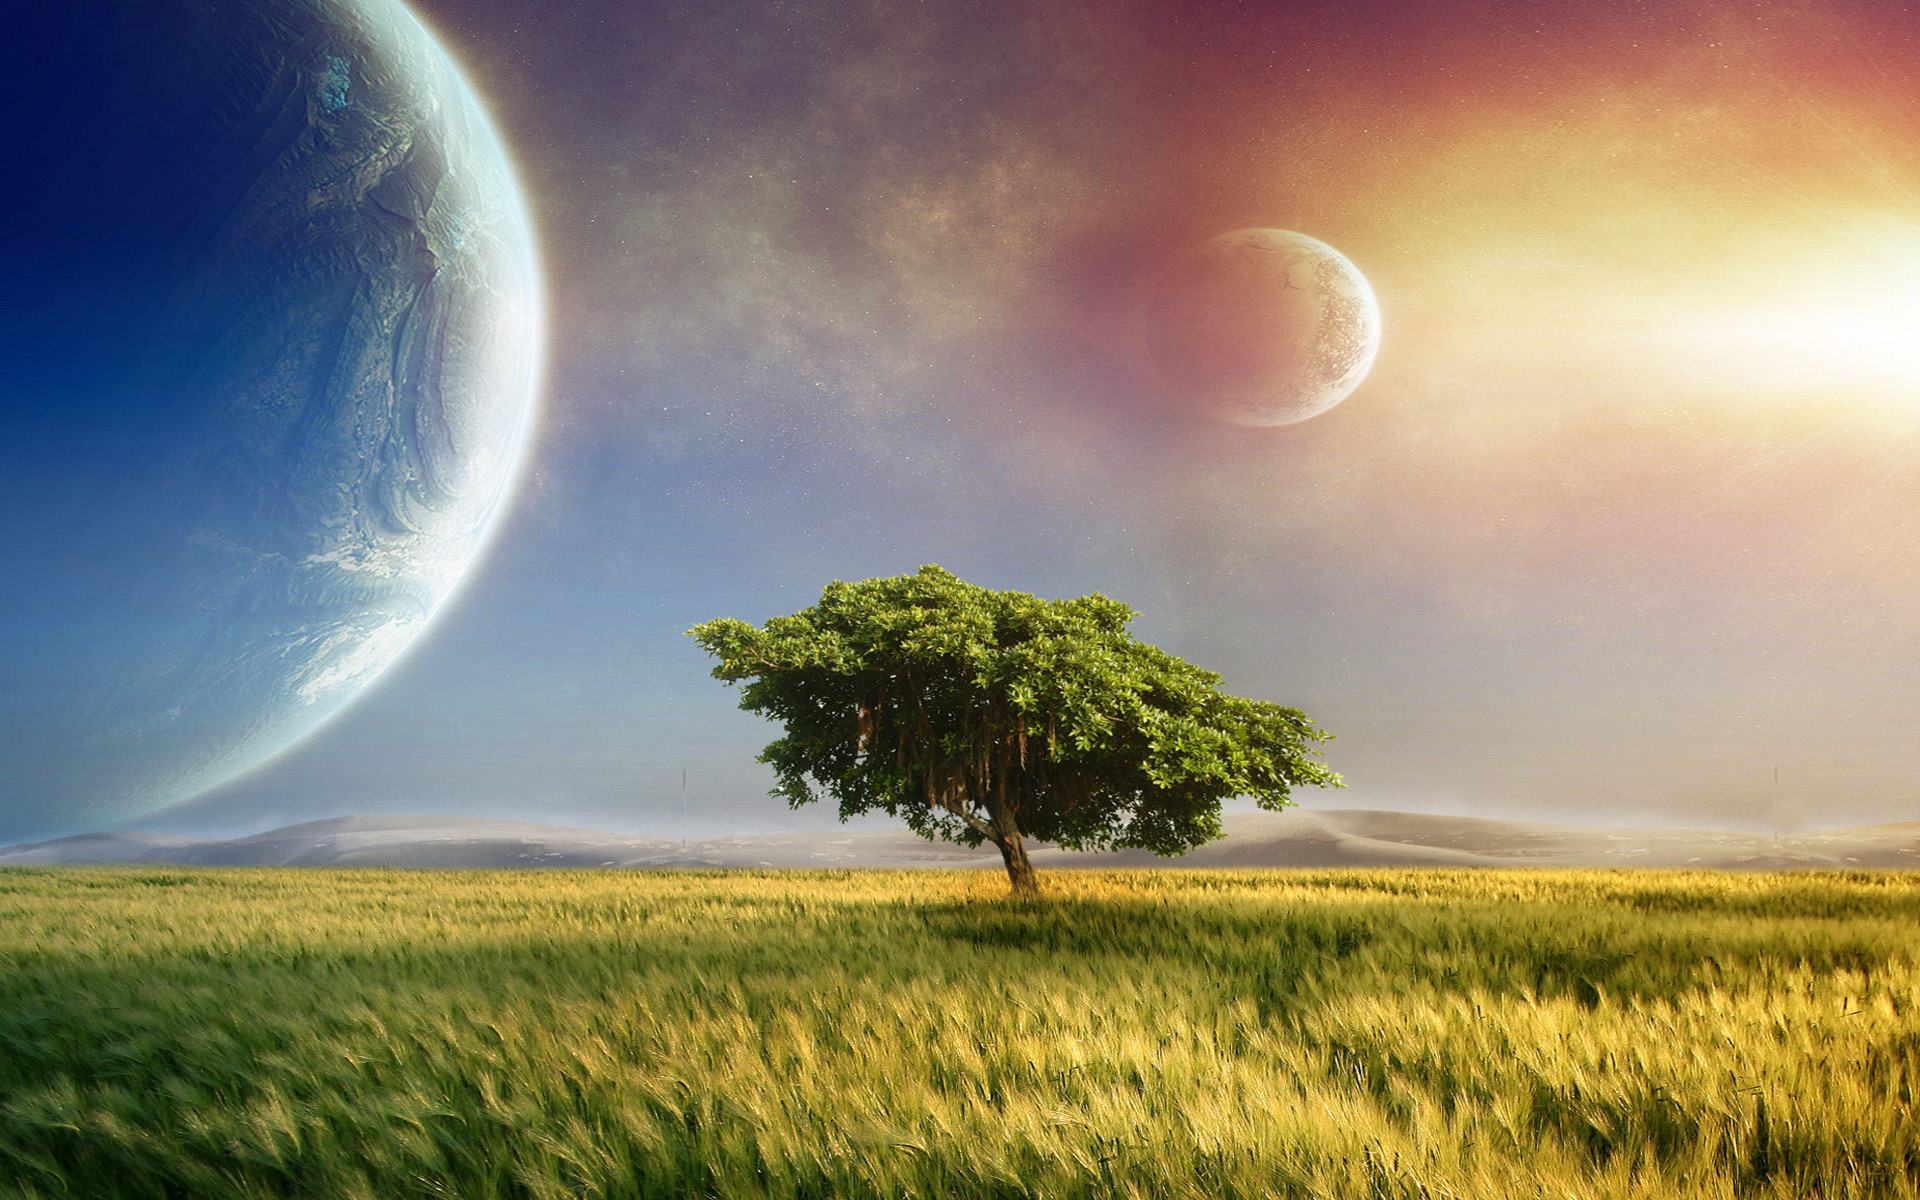 nature, outer space, trees, planets, grass, science fiction - desktop wallpaper